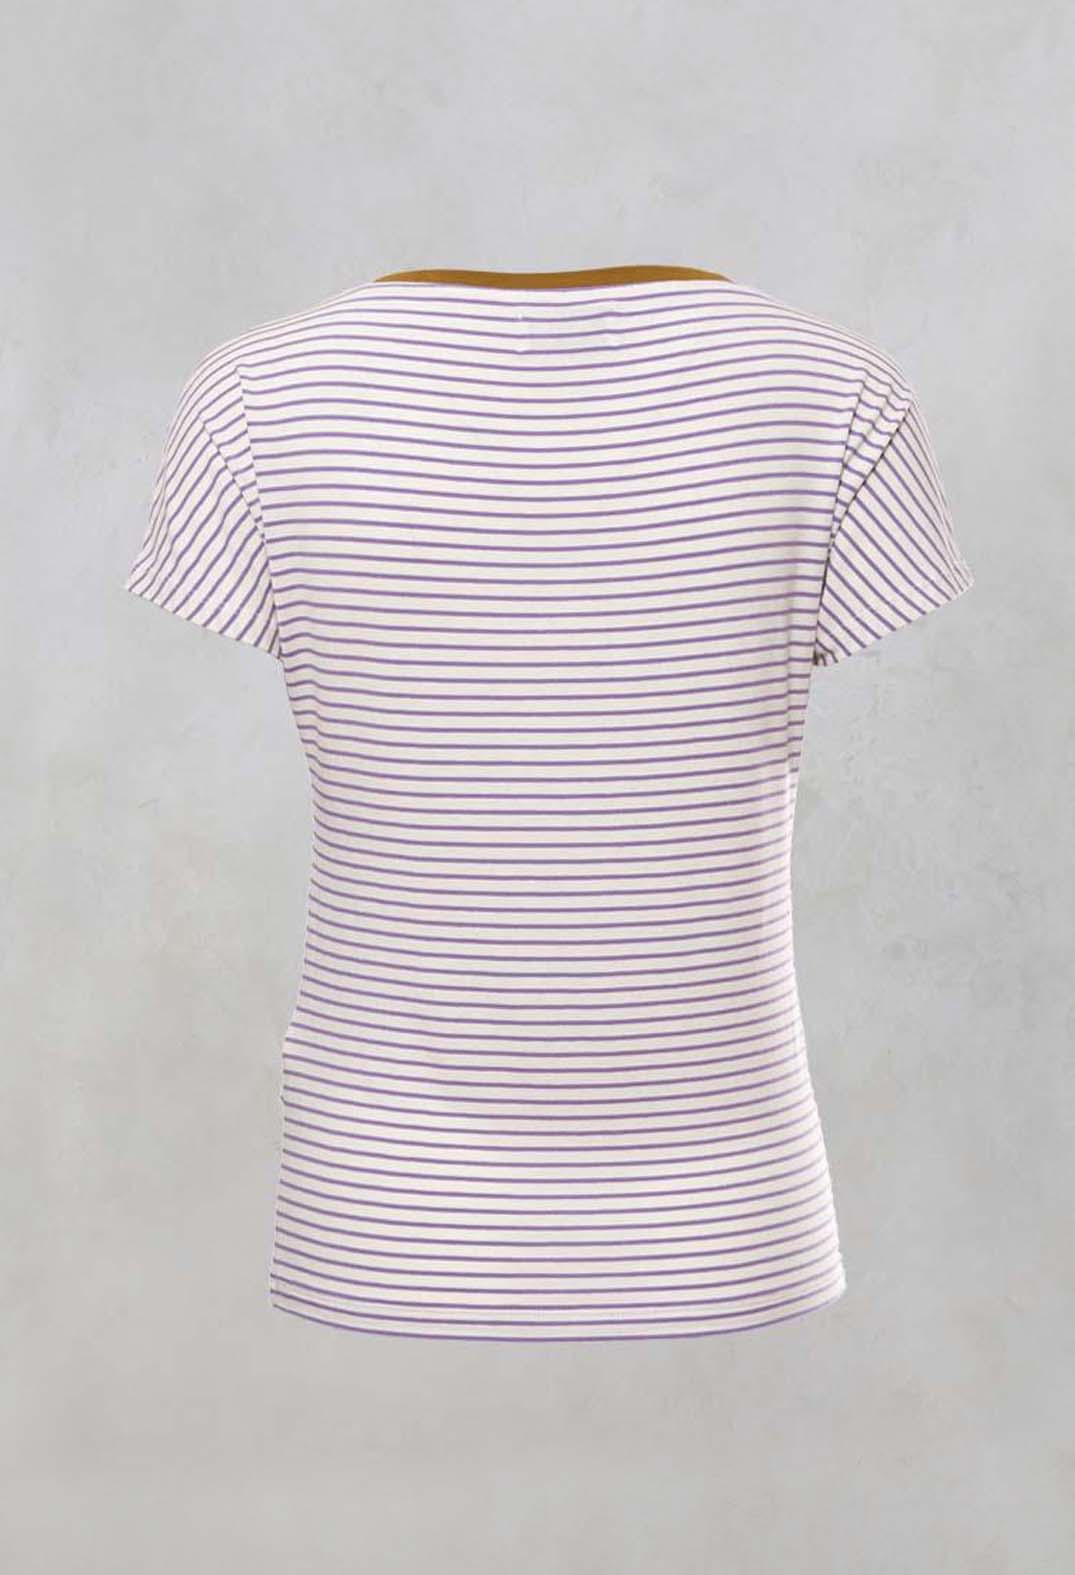 Striped T Shirt with Contrast Neckline in Lilla